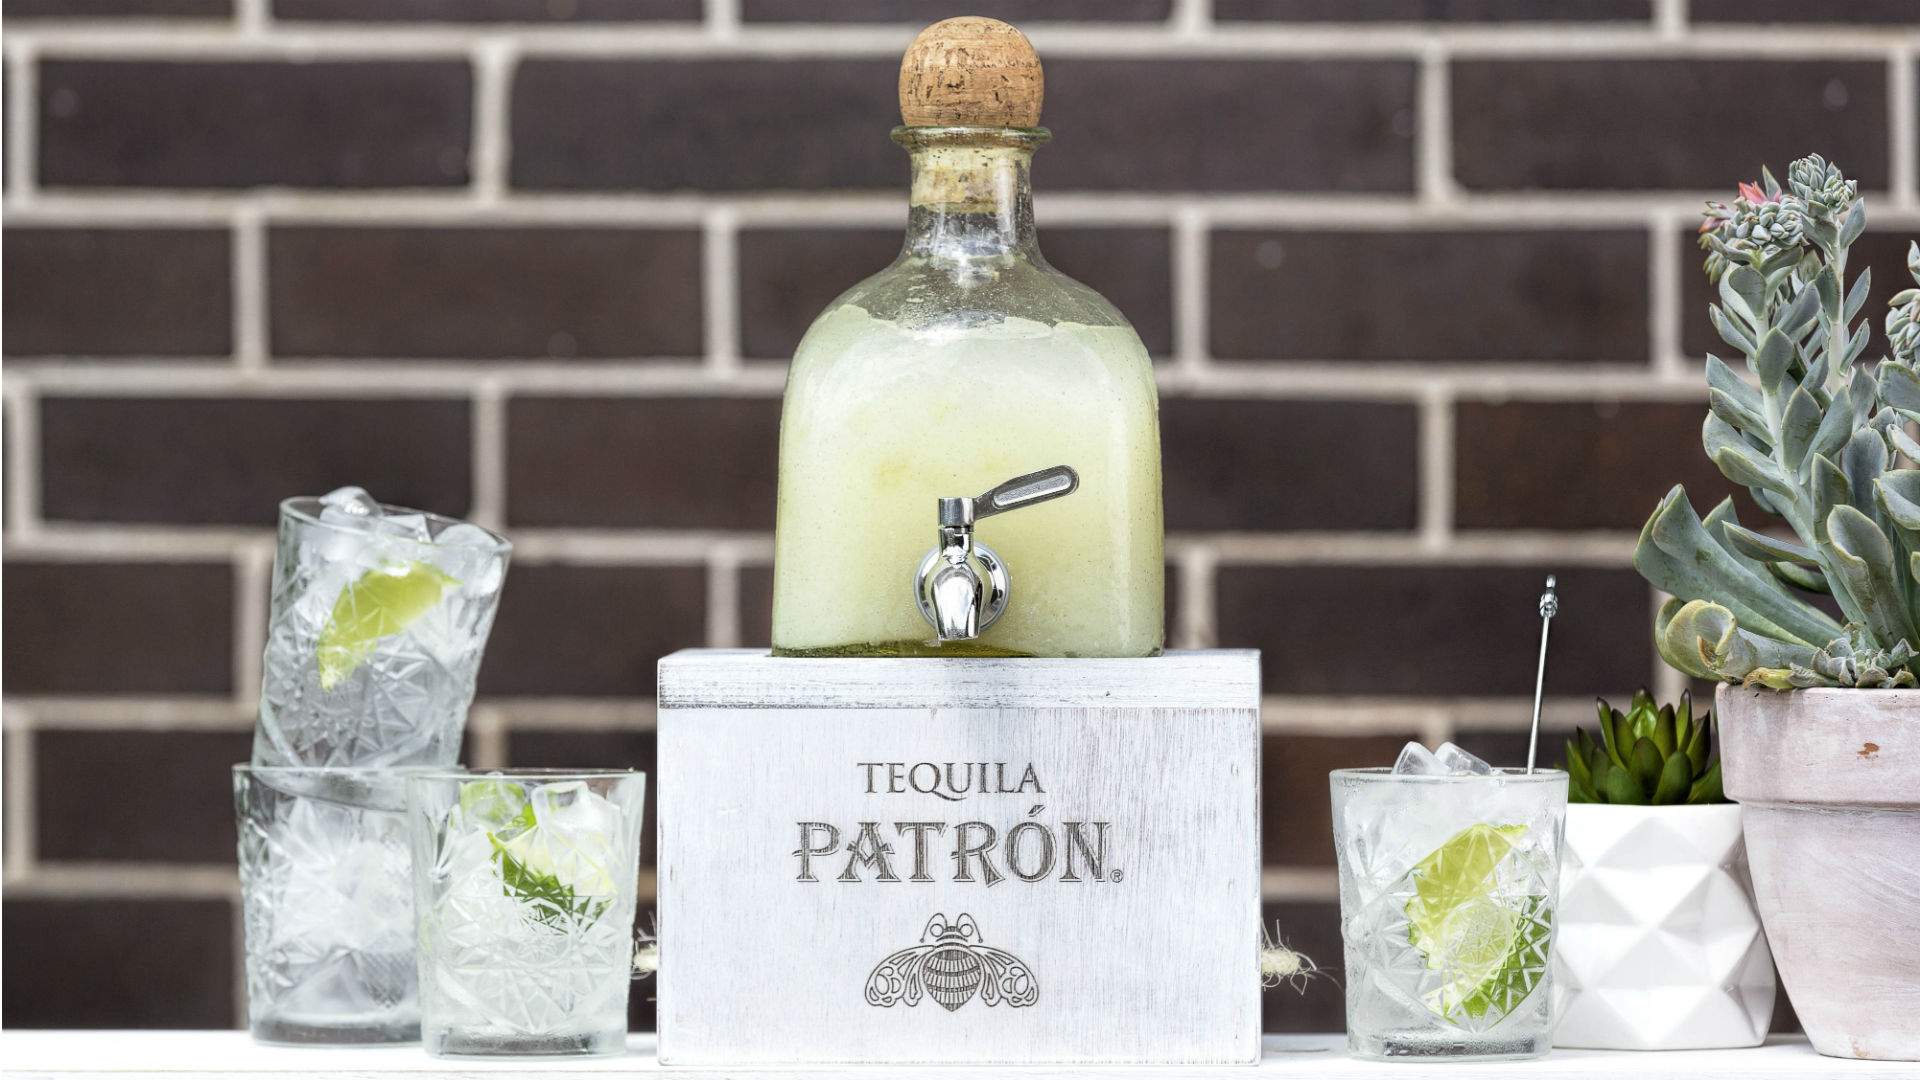 Last Days of Summer at The Tilbury with Patrón